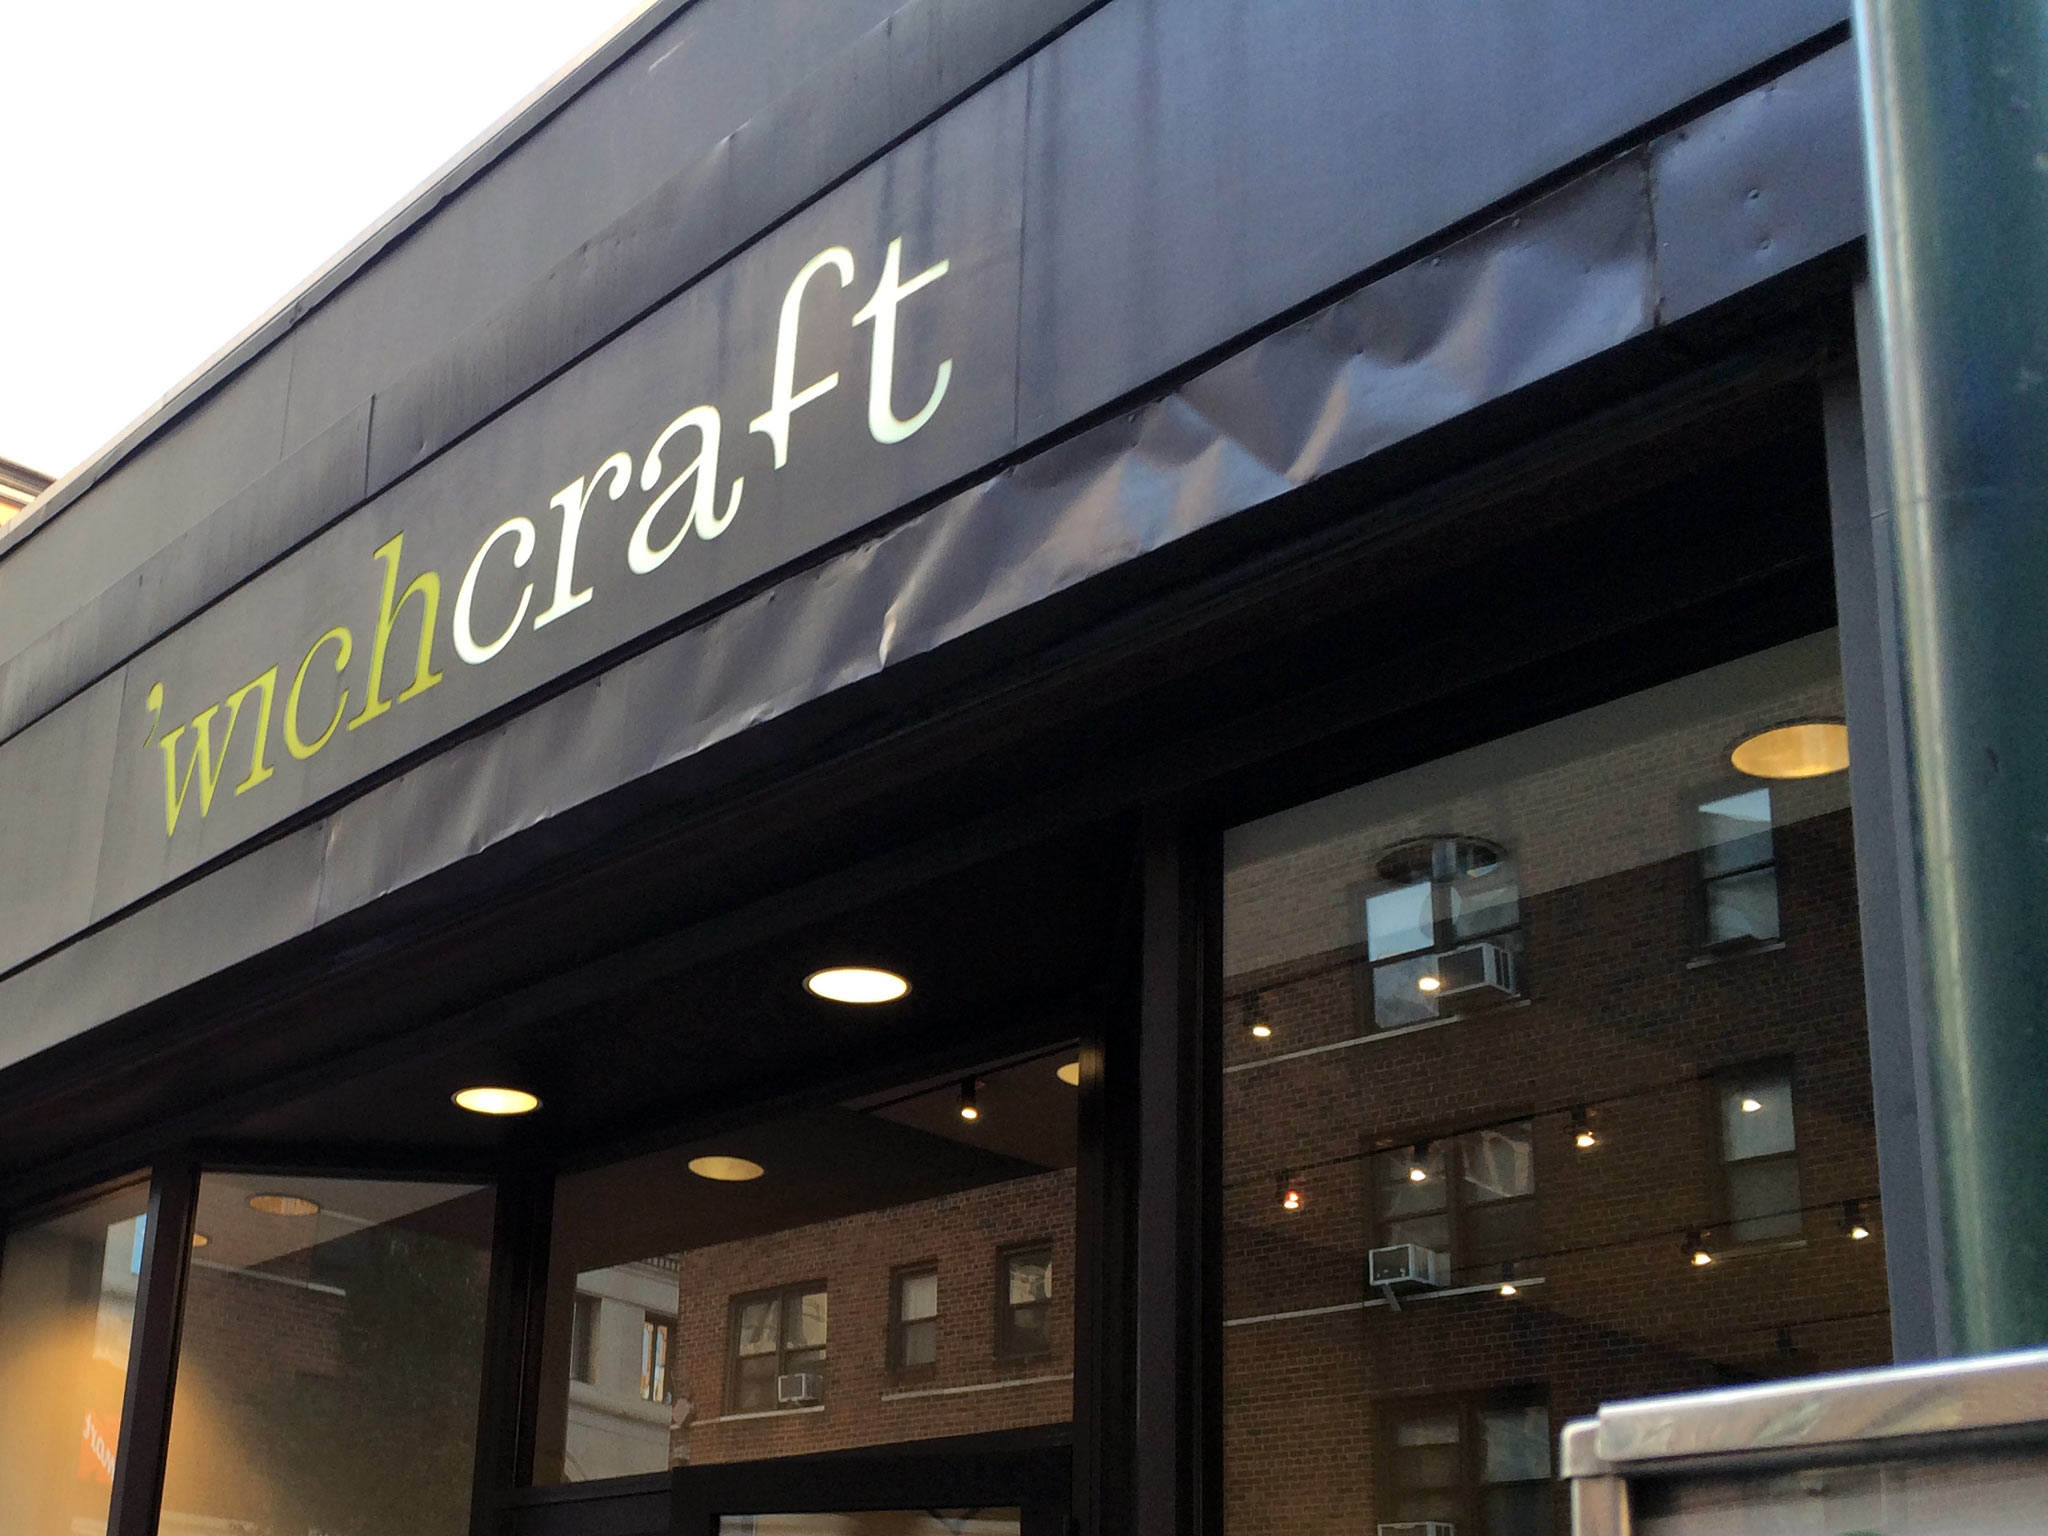 'wichcraft in New York. Photo by alphacityguides.